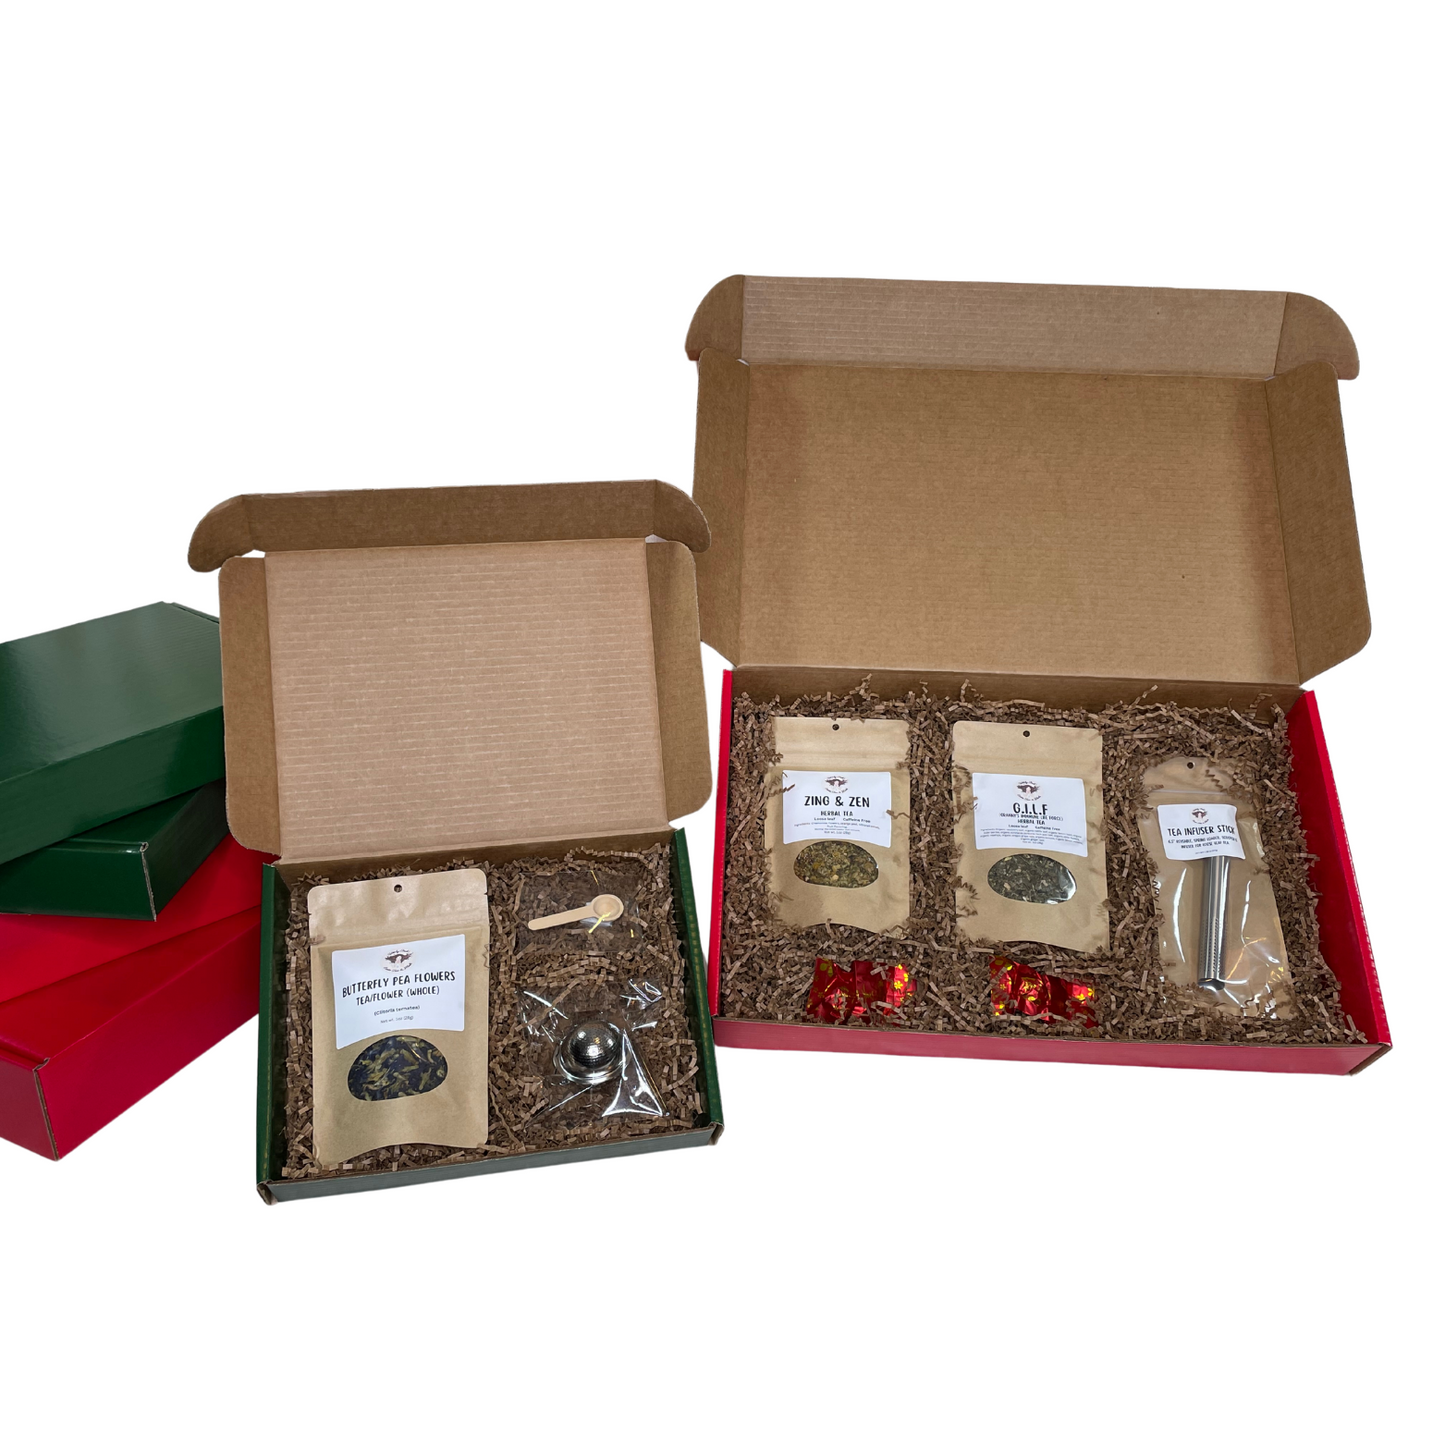 Gift Box Set with 2-1oz Pouches of Tea, A Spring Action Tea Infuser Stick, 2 Blooming Tea Balls in a Large Red Mailer Box